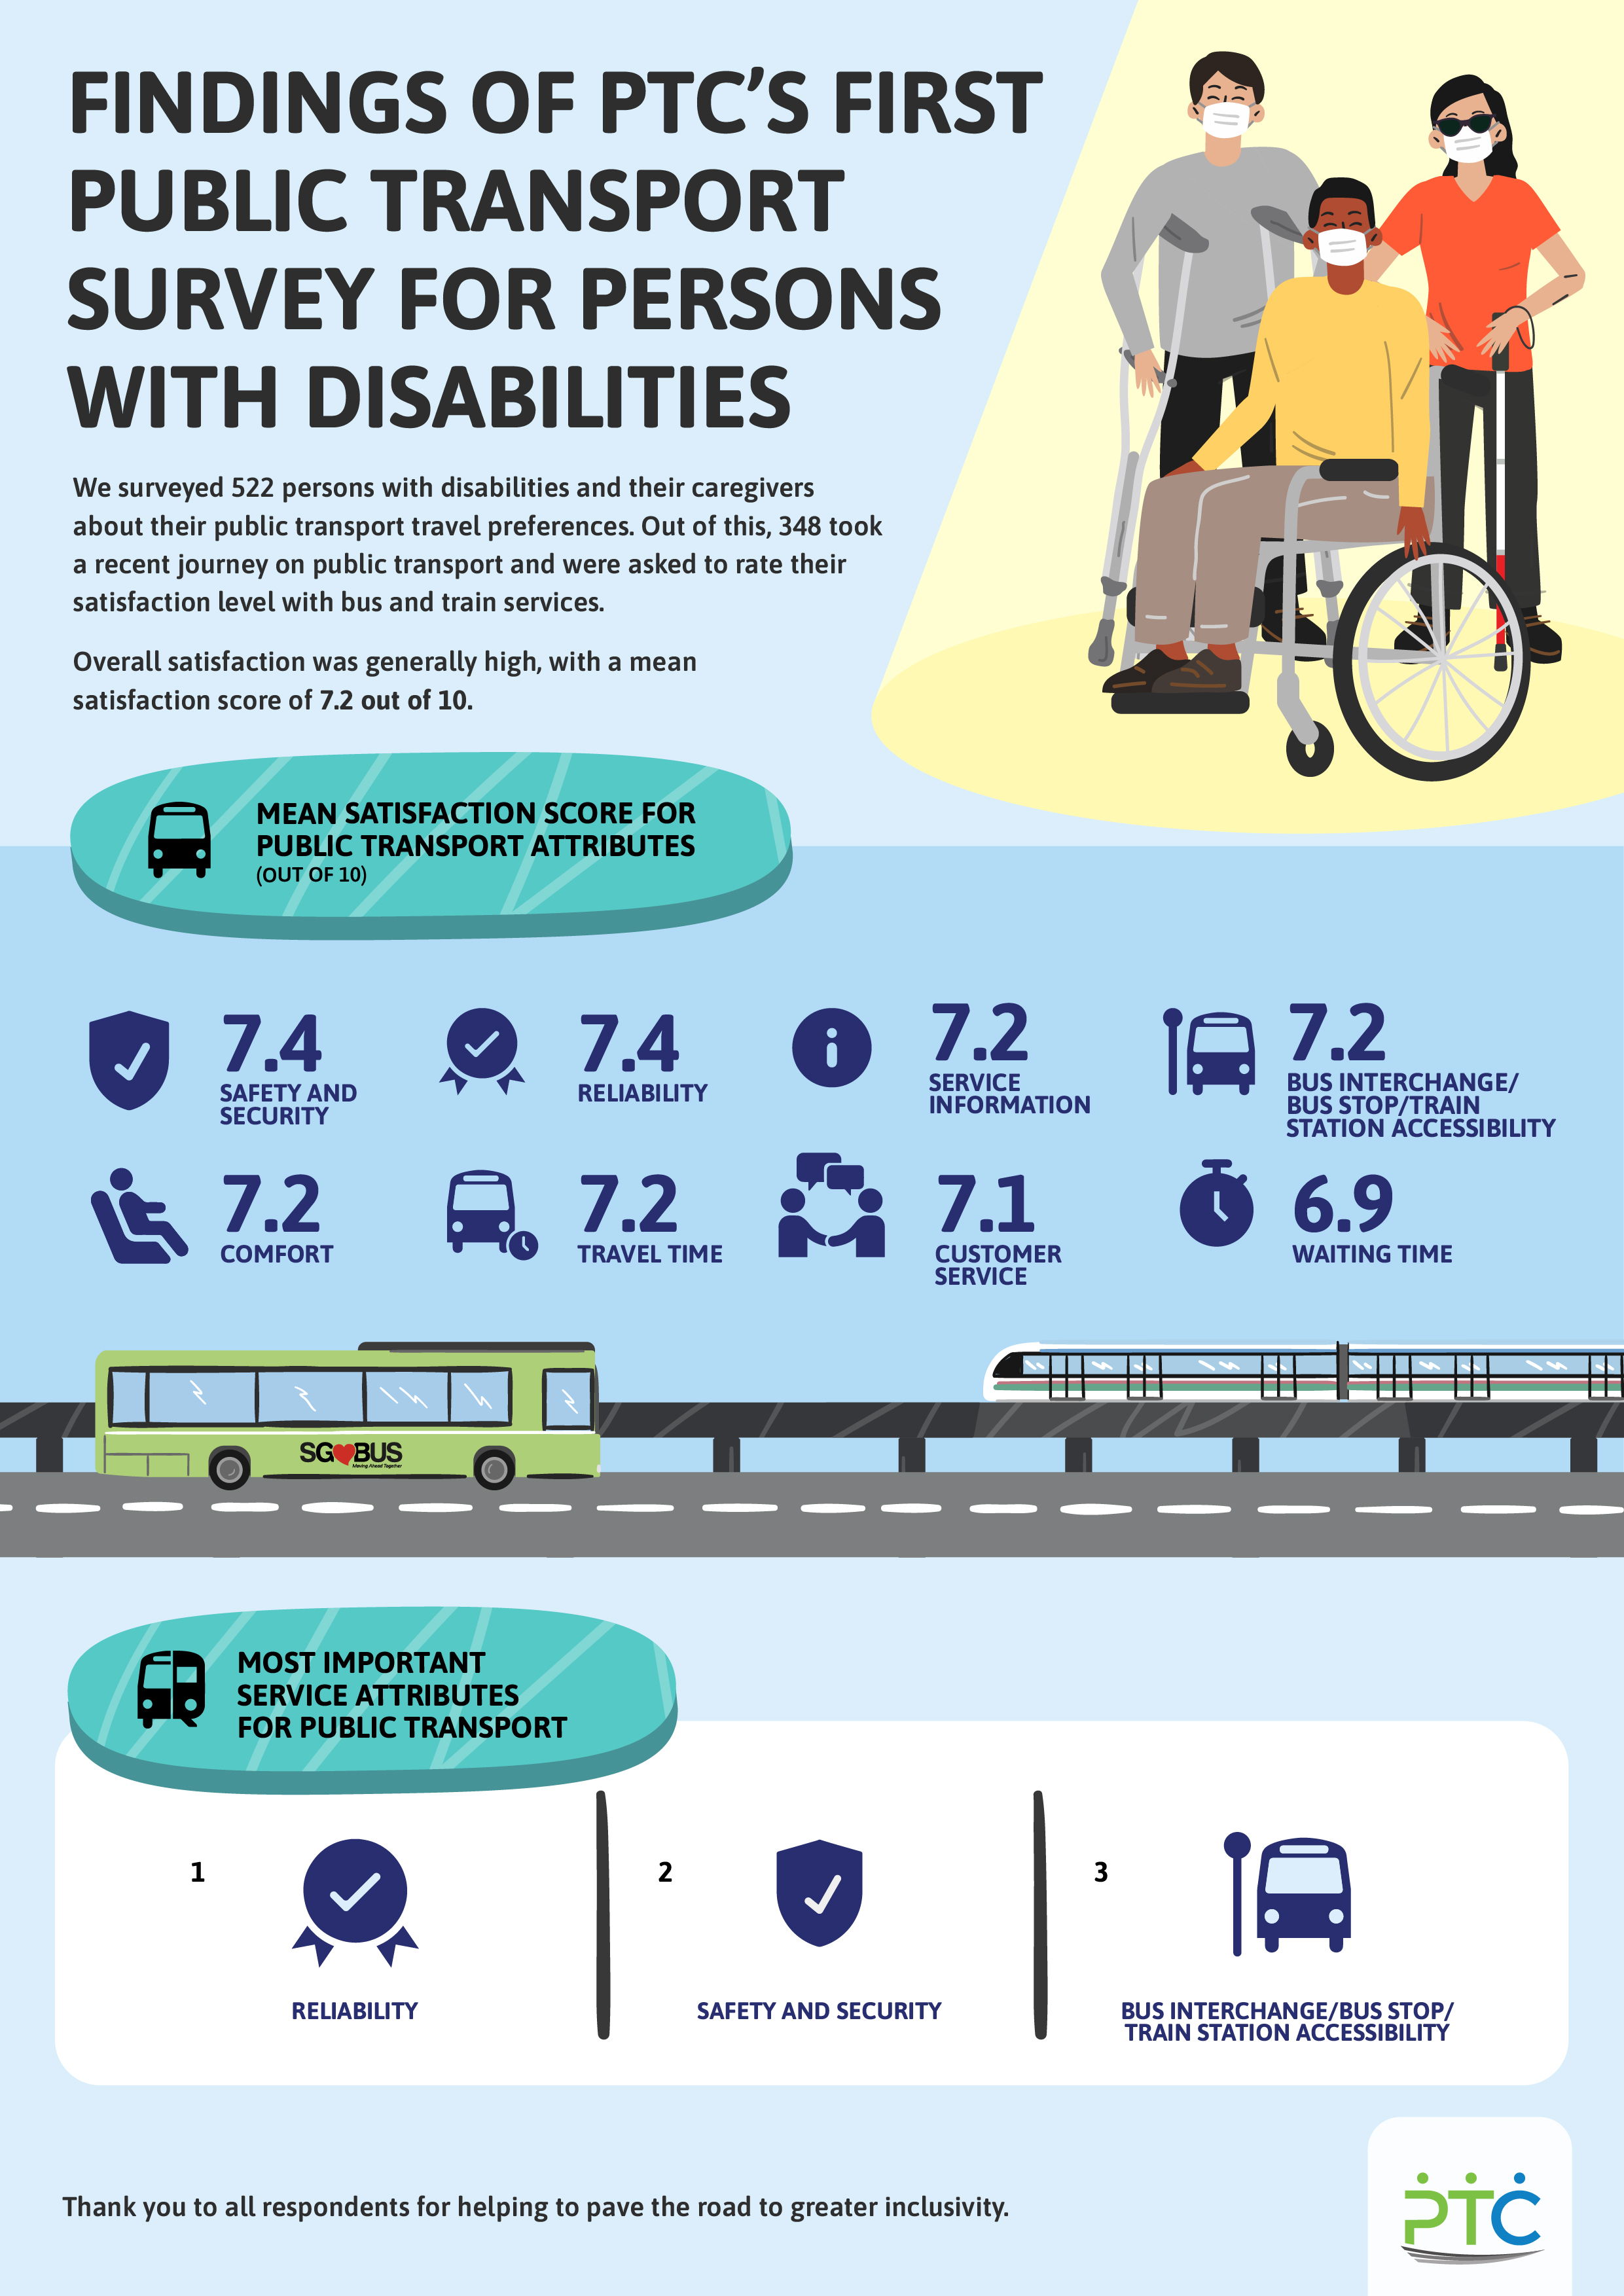 Findings Of PTC's First Public Transport Survey For Persons With Disabilities